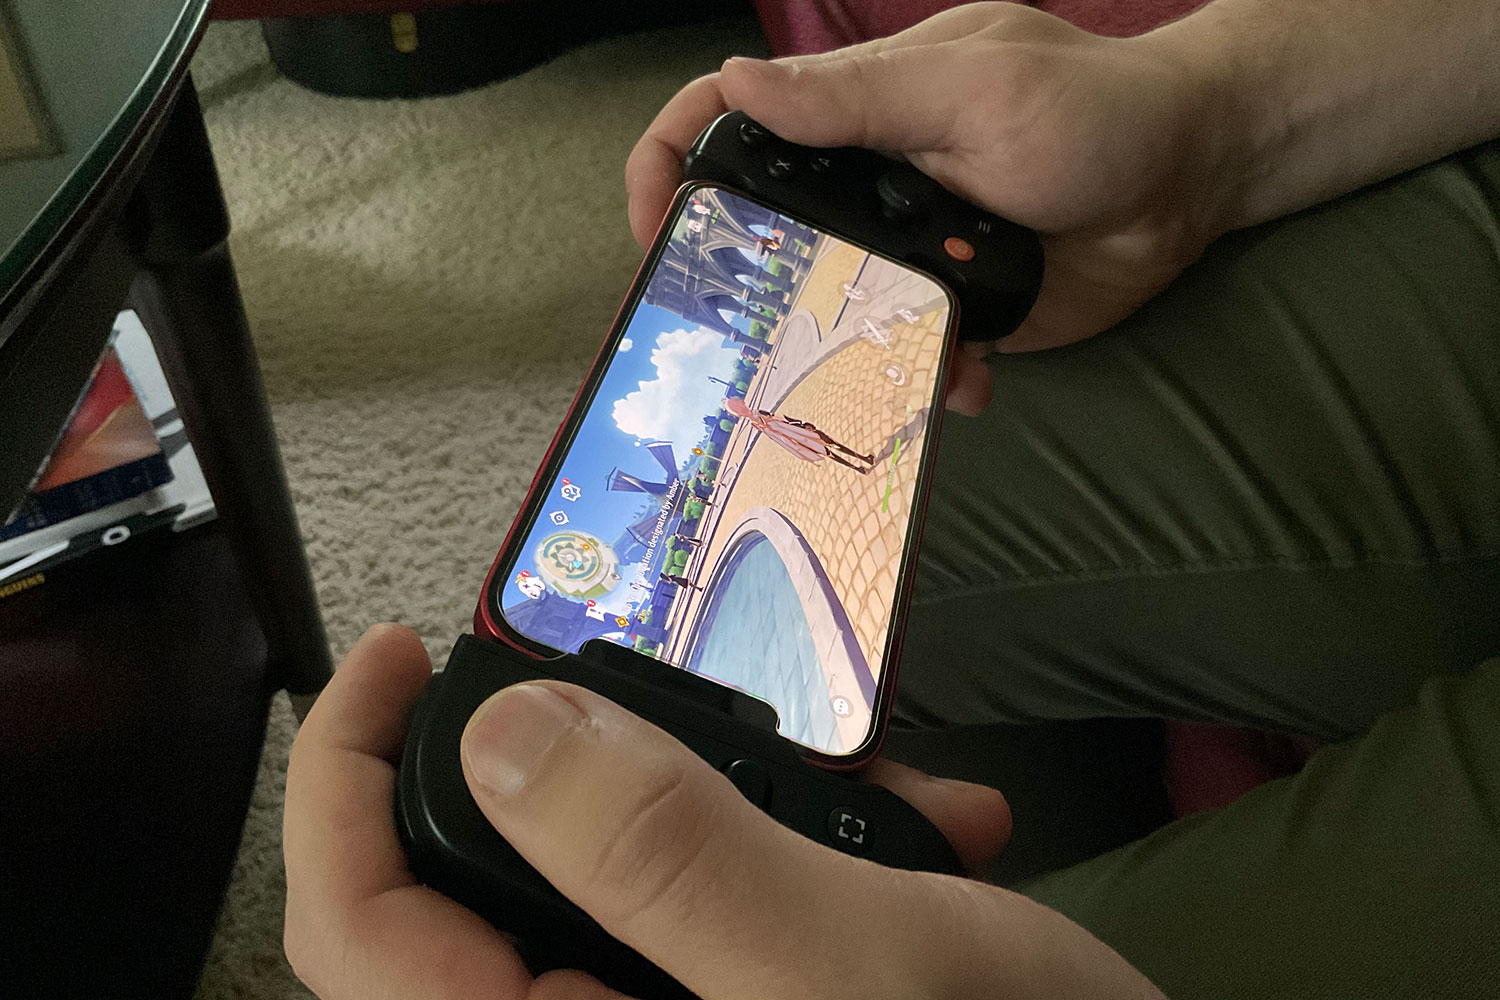 A Backbone controller held in a person's hands with an iPhone 12 inside it. On the screen of the phone, Genshin Impact is being played.